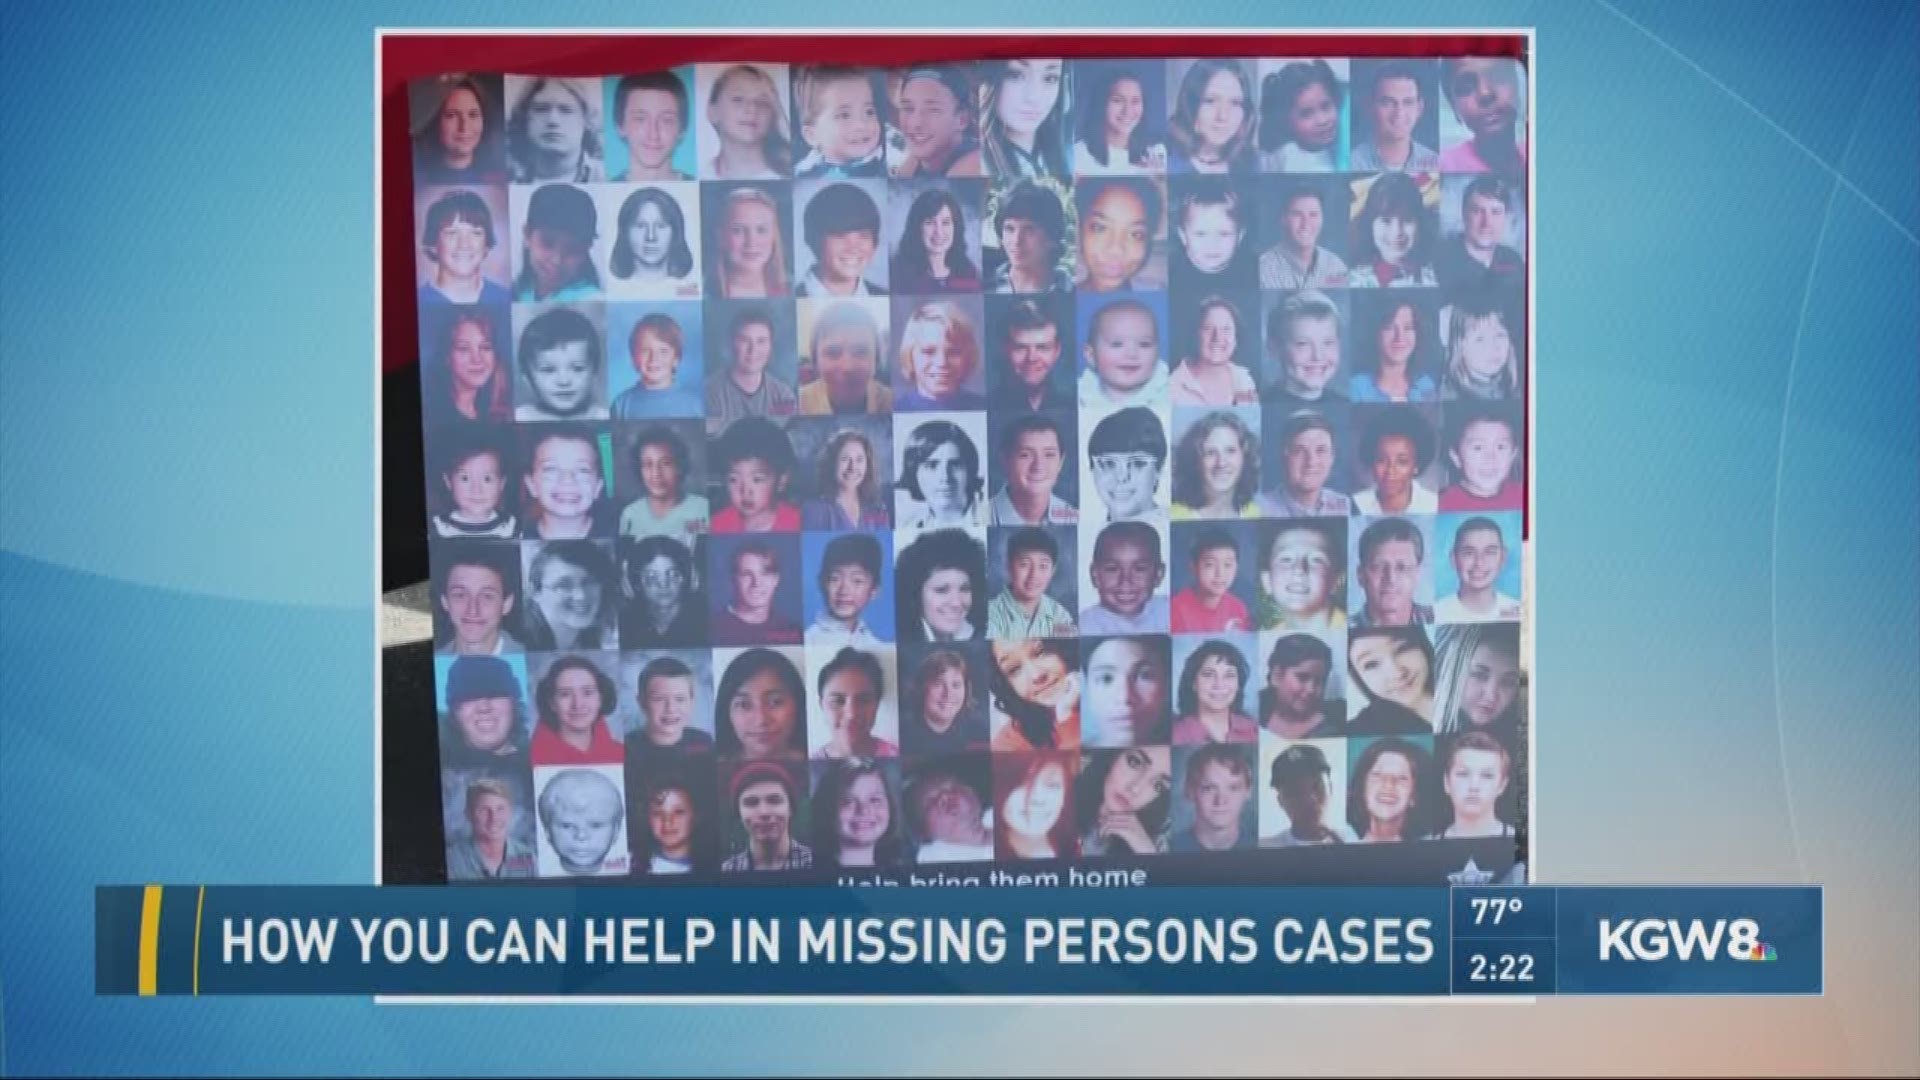 How you can help in missing persons cases